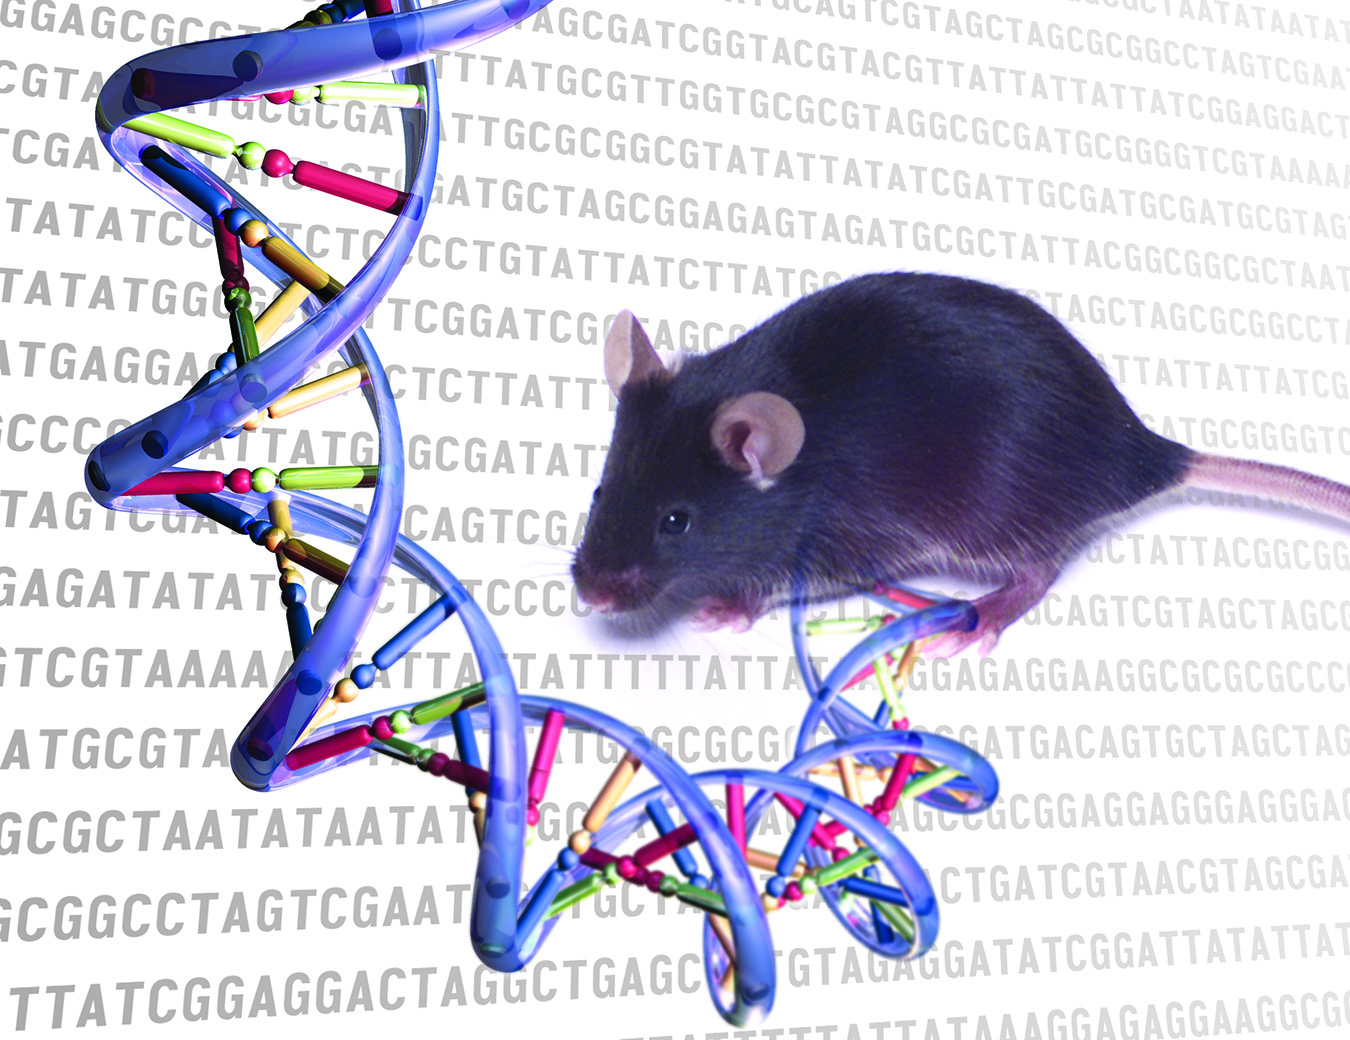 The mouse ENCODE project, part of the ENCODE, or ENCyclopedia Of DNA Elements, program is supported by the National Human Genome Research Institute (NHGRI). ENCODE is building a comprehensive catalog of functional elements in the human and mouse genomes.